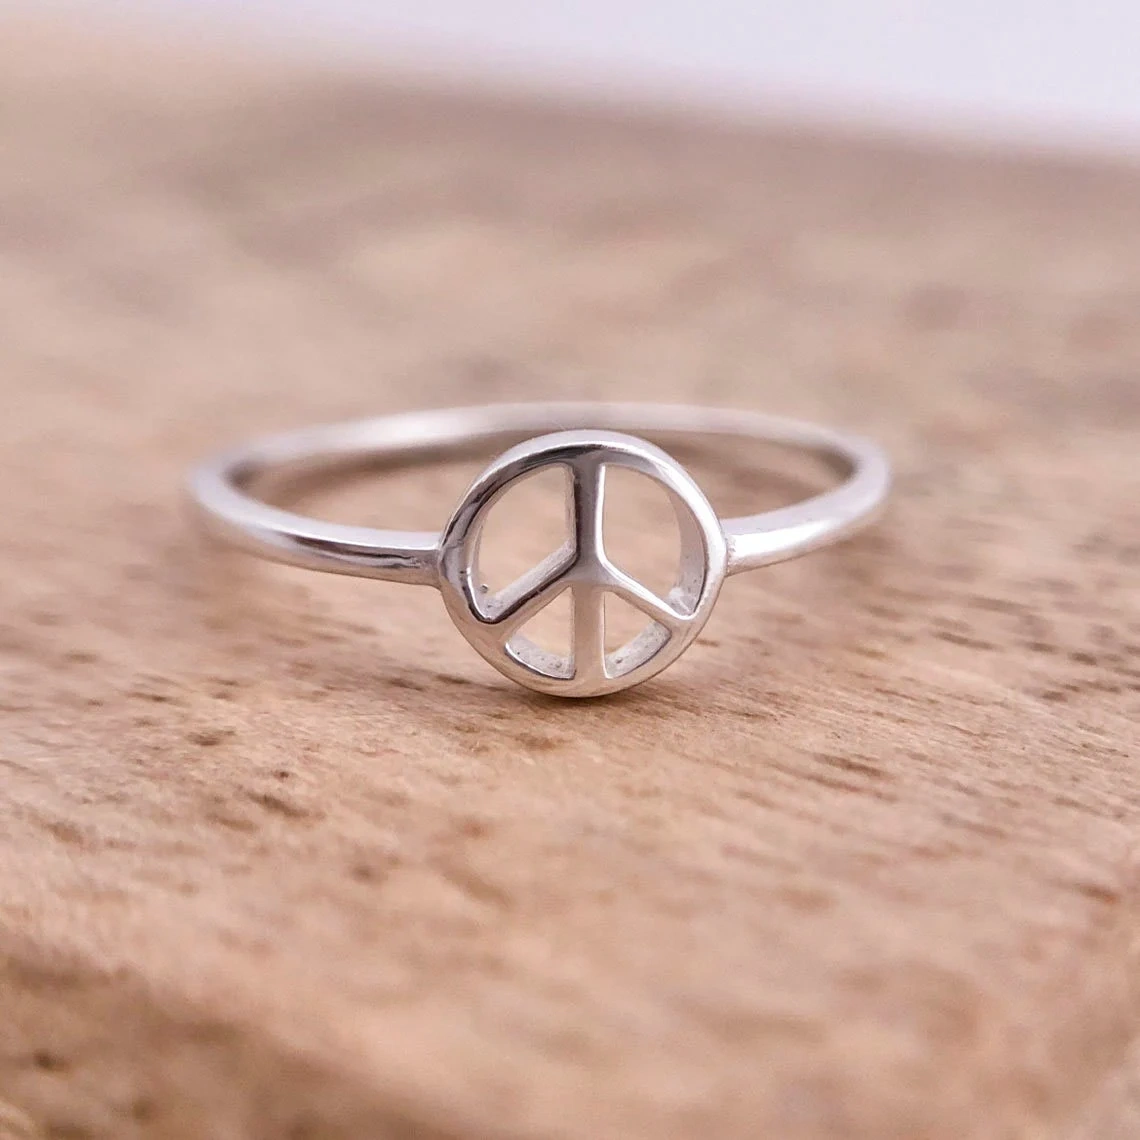 925 Sterling Silver Peace Ring Silver Unique Retro ring Geometric Stacking Solid Silver Hippie Modern Ring Minimalist Unisex peace ring-11401528